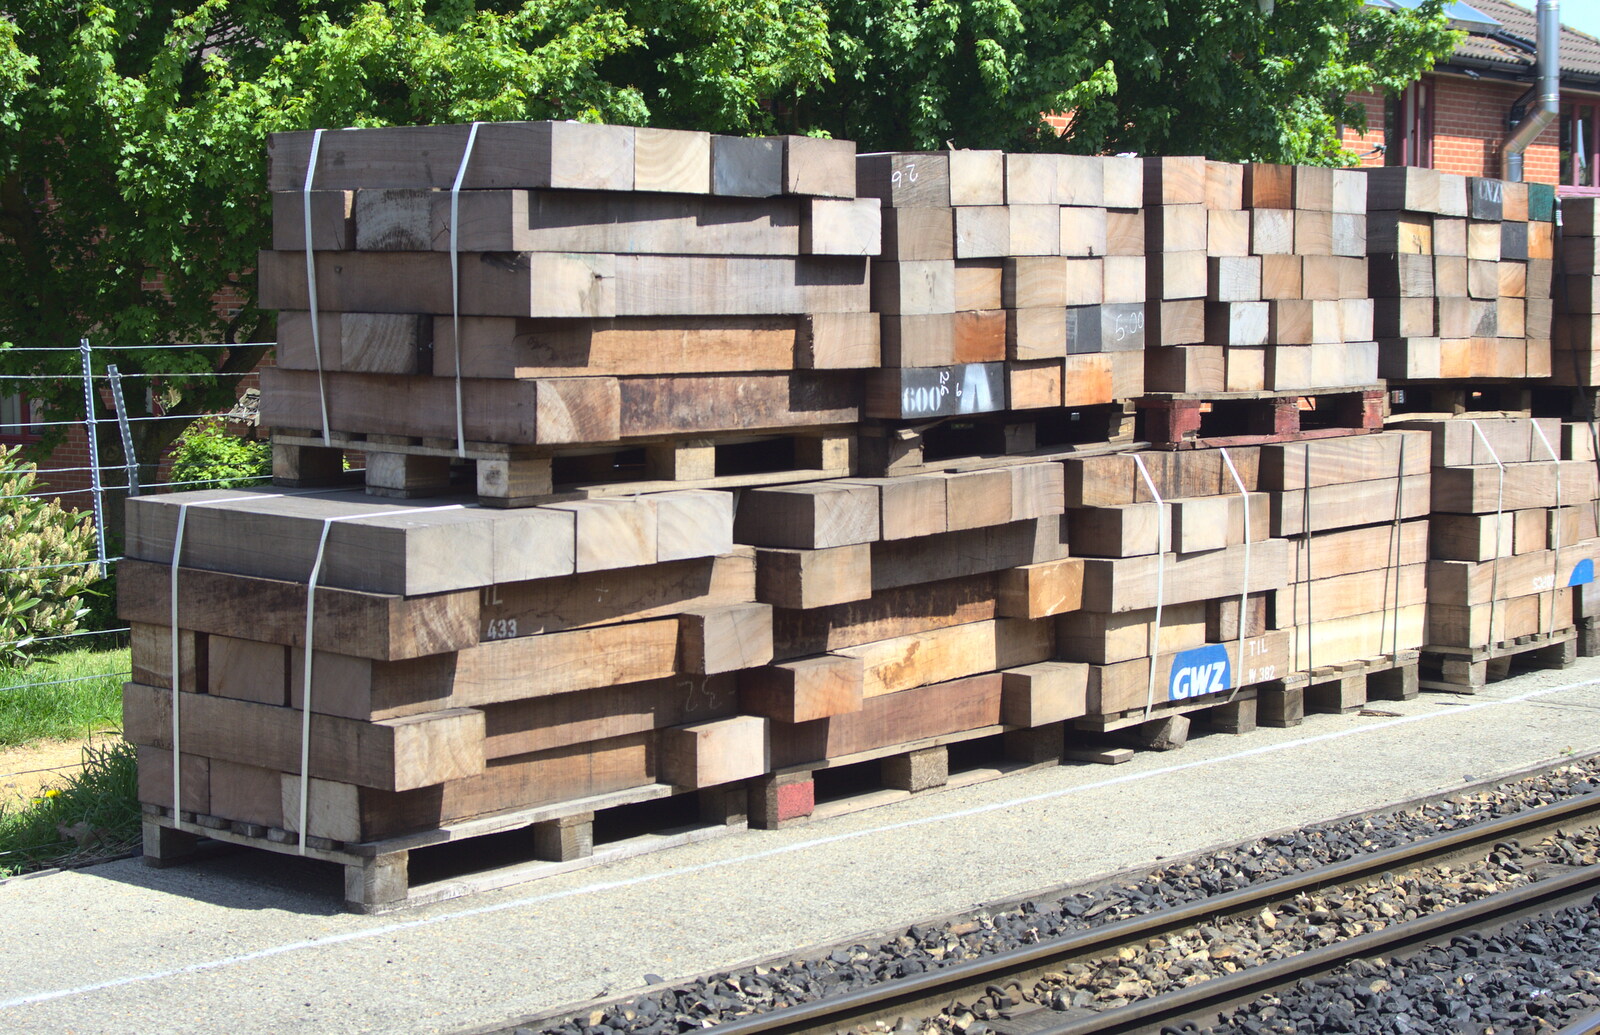 Stacks of nice new sleepers from The Bure Valley Railway, Aylsham, Norfolk - 26th May 2013